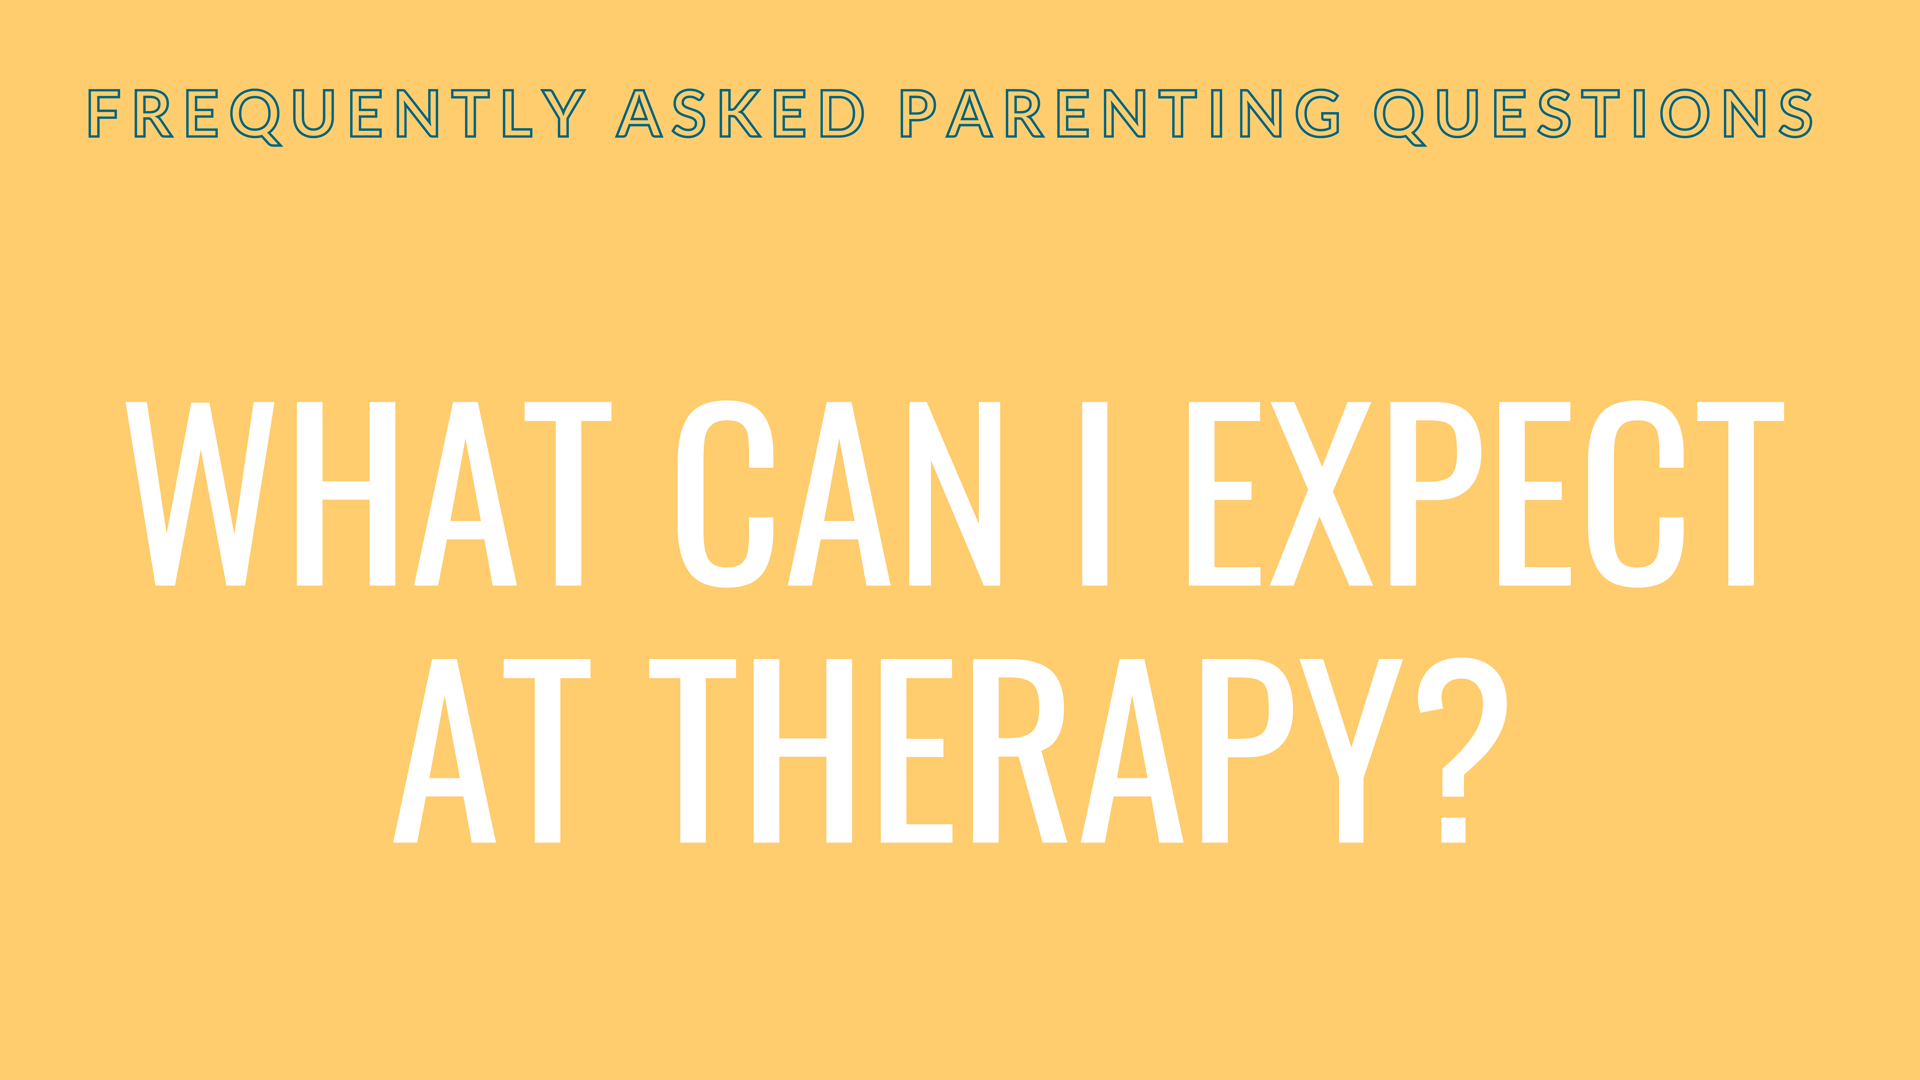 What can I expect at therapy?